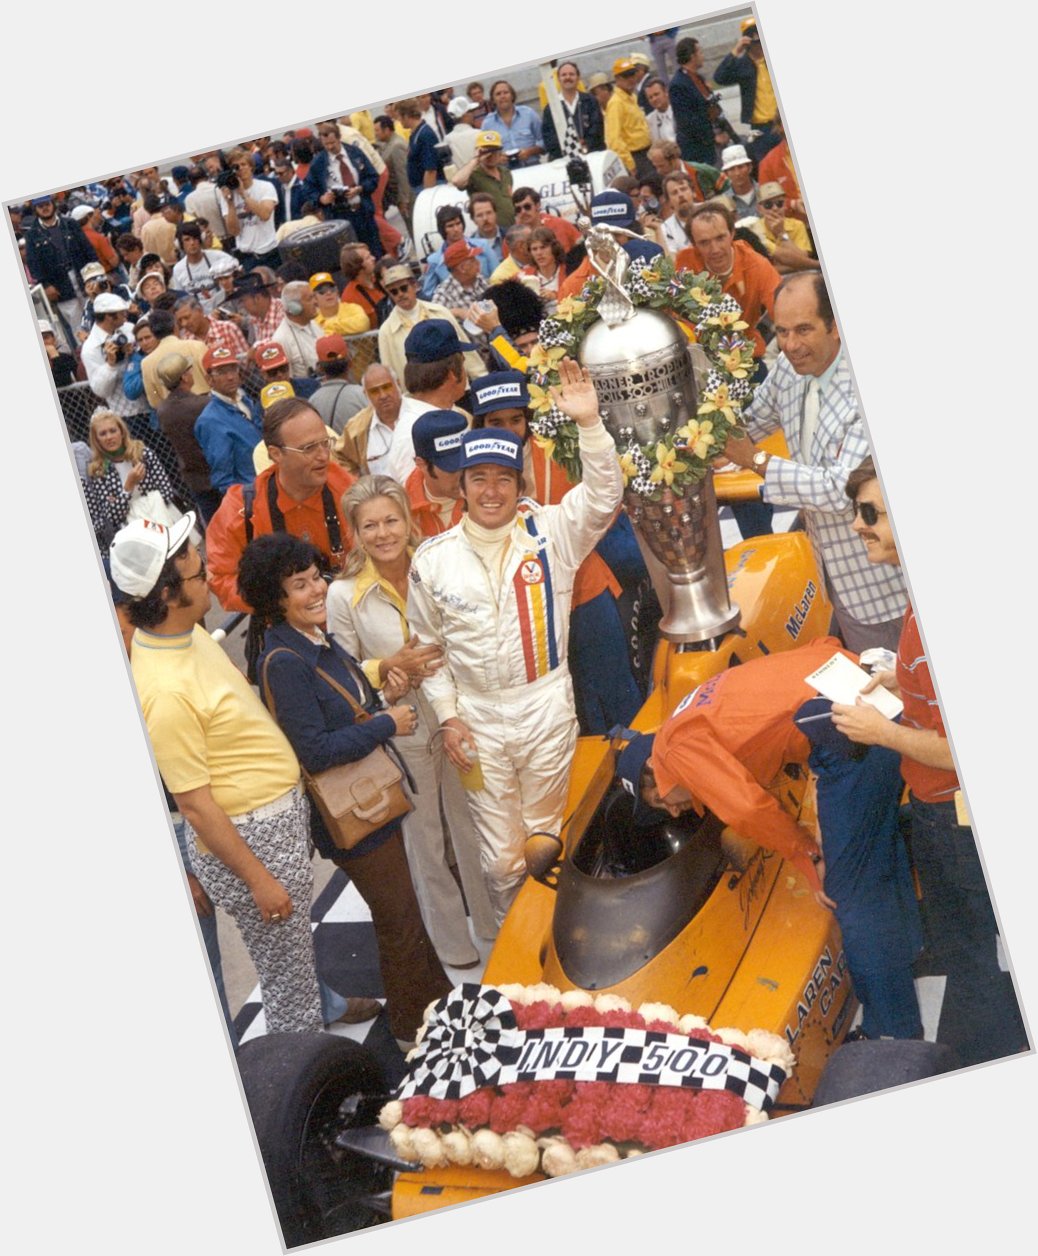 Wishing a happy birthday to three-time champion Johnny Rutherford today!   